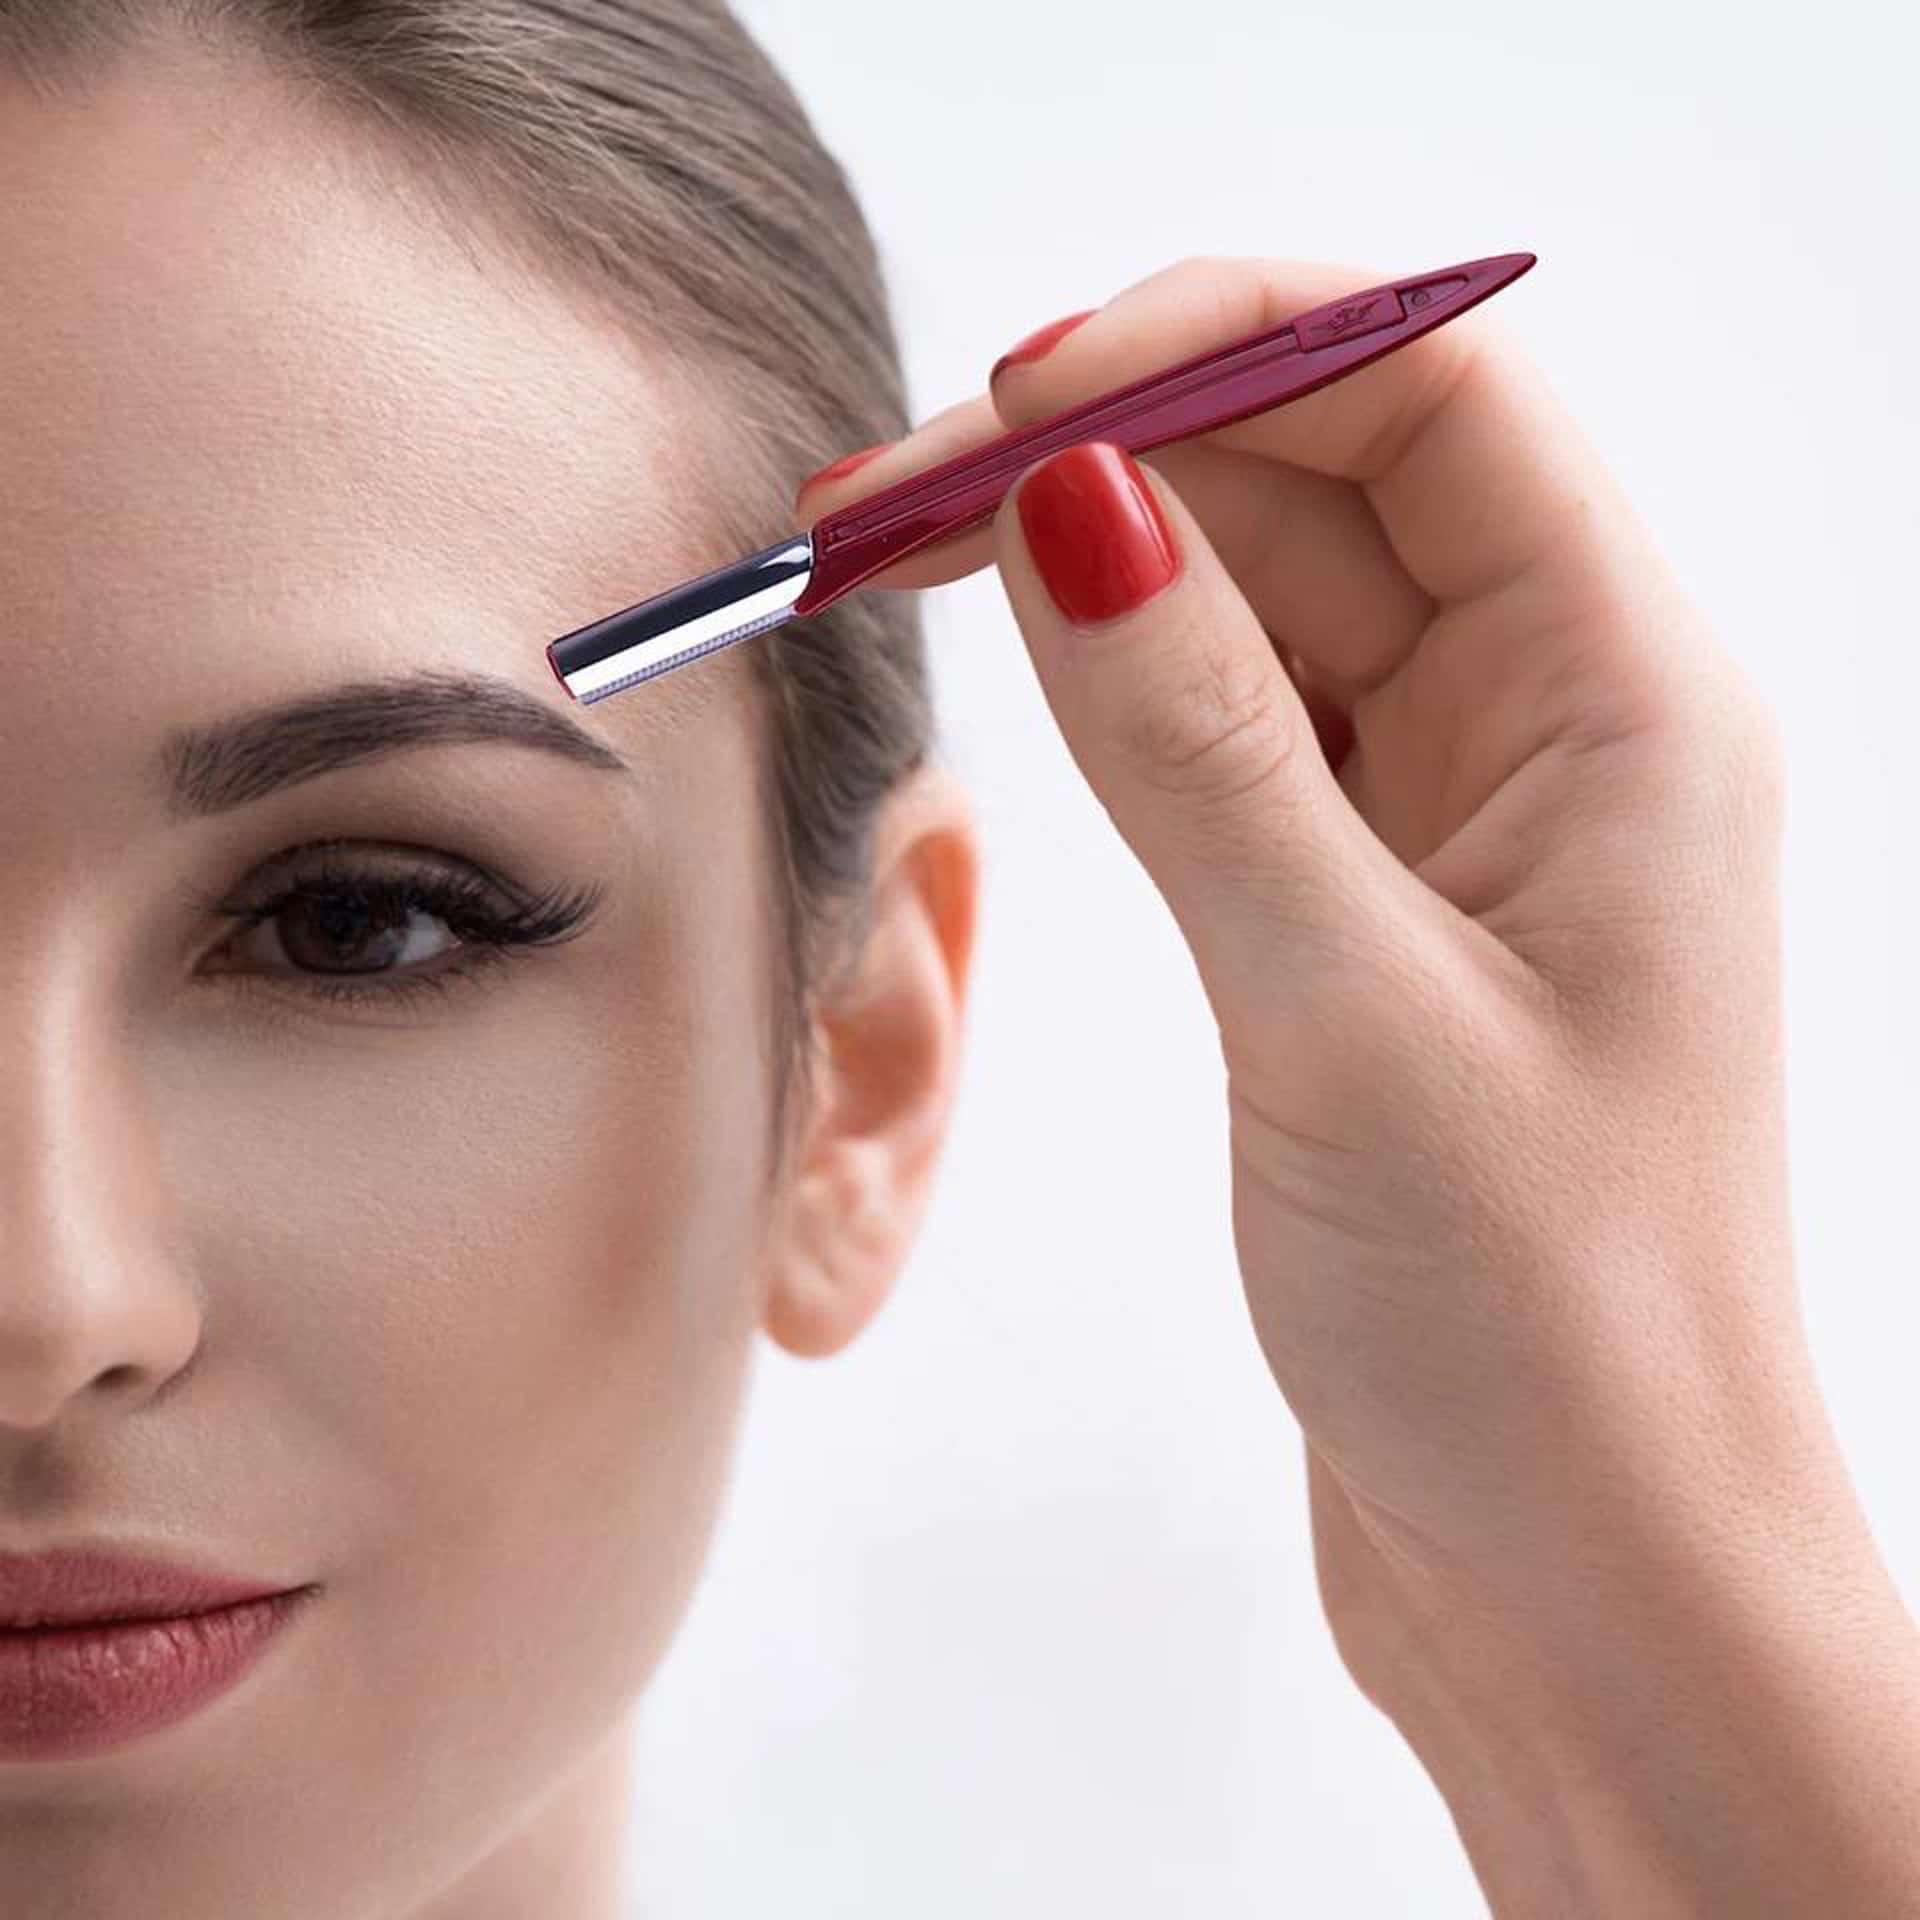 This Eyebrow Trimming Knife trims your eyebrow with precision for a professional perfect brow shape.